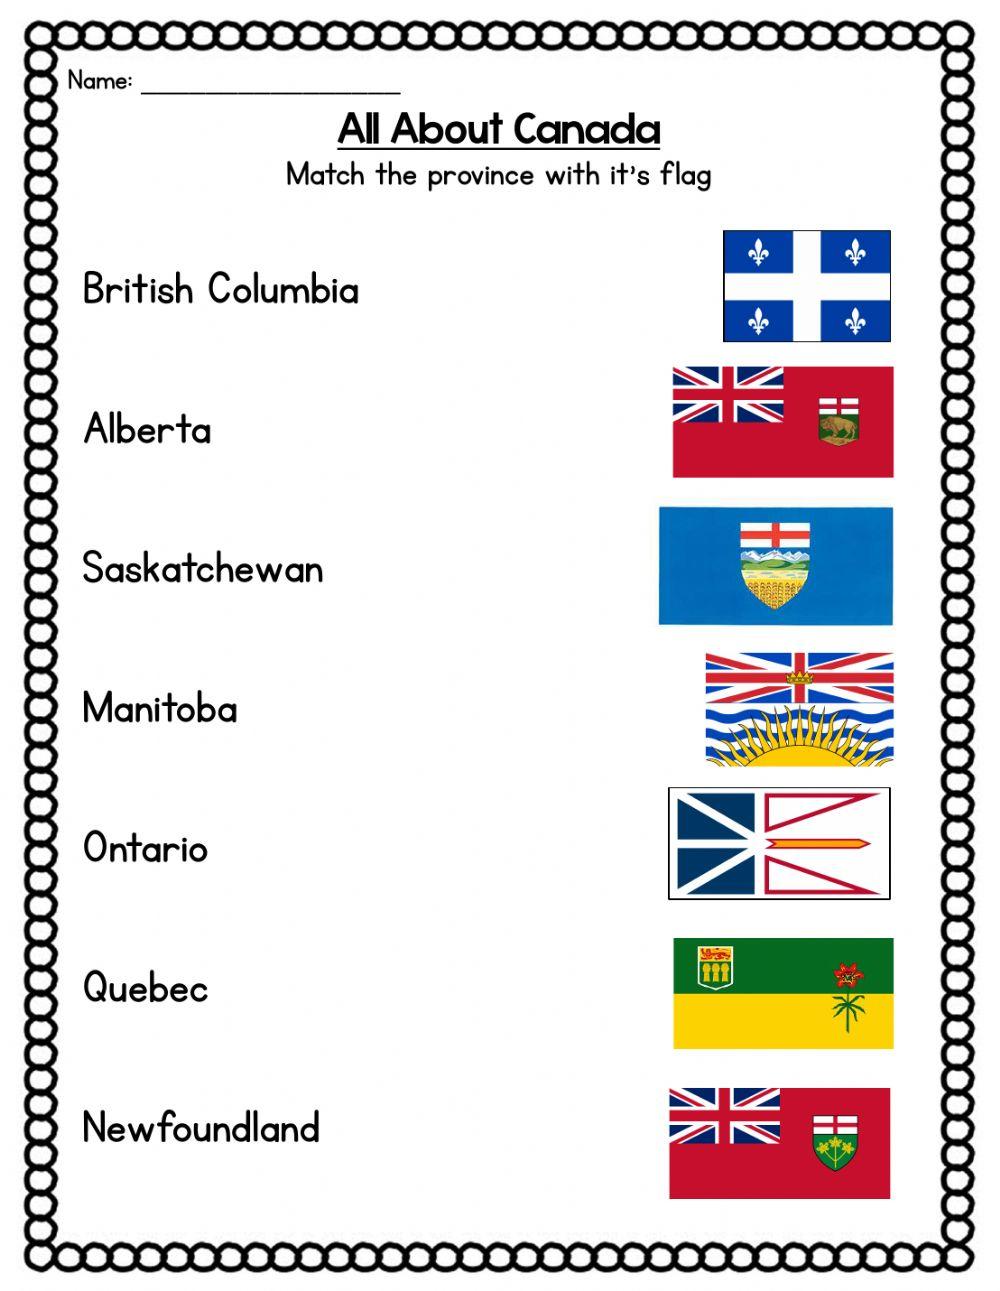 Canada - Matching Provincial Animals and Flags